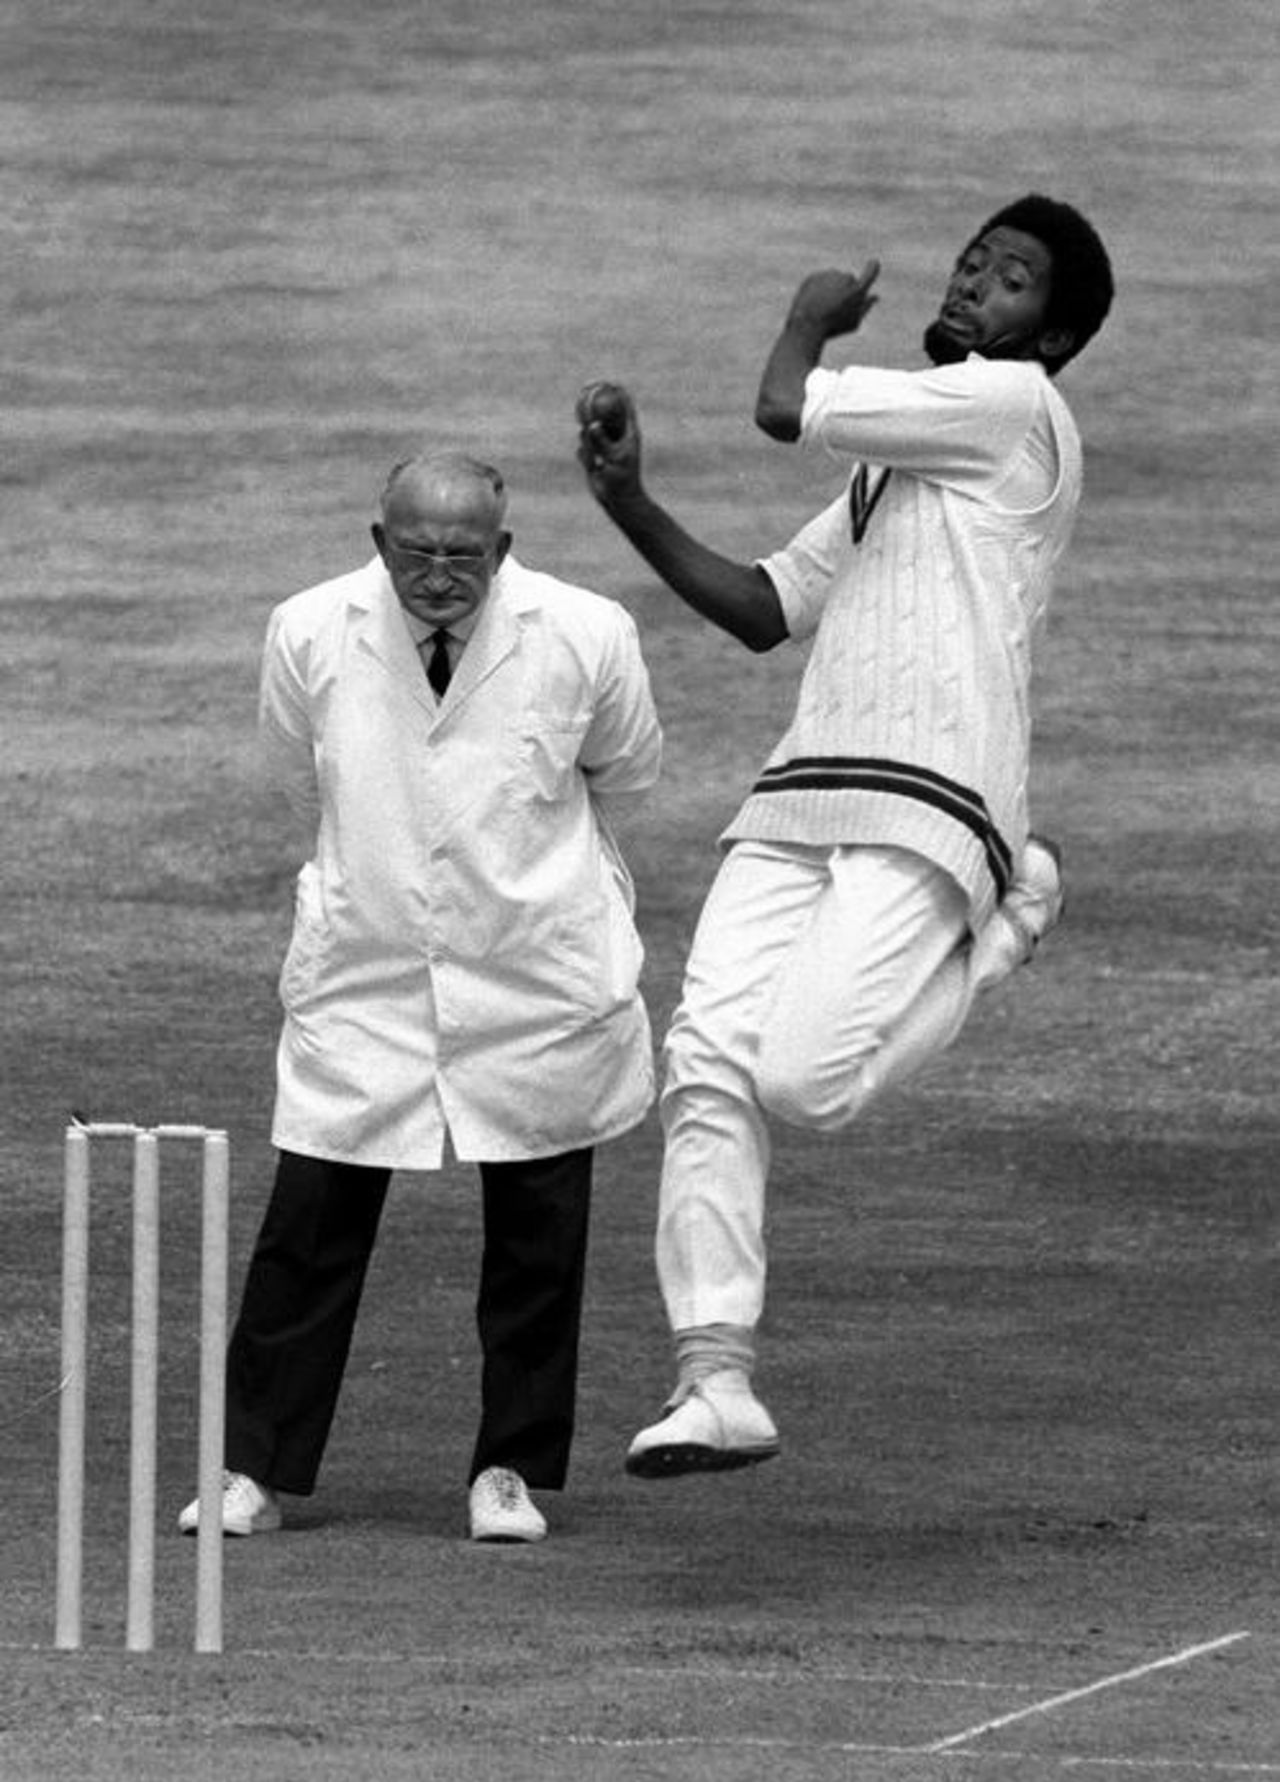 Andy Roberts bowls, England v West Indies, fourth Test, Headingley, 23 July, 1976 